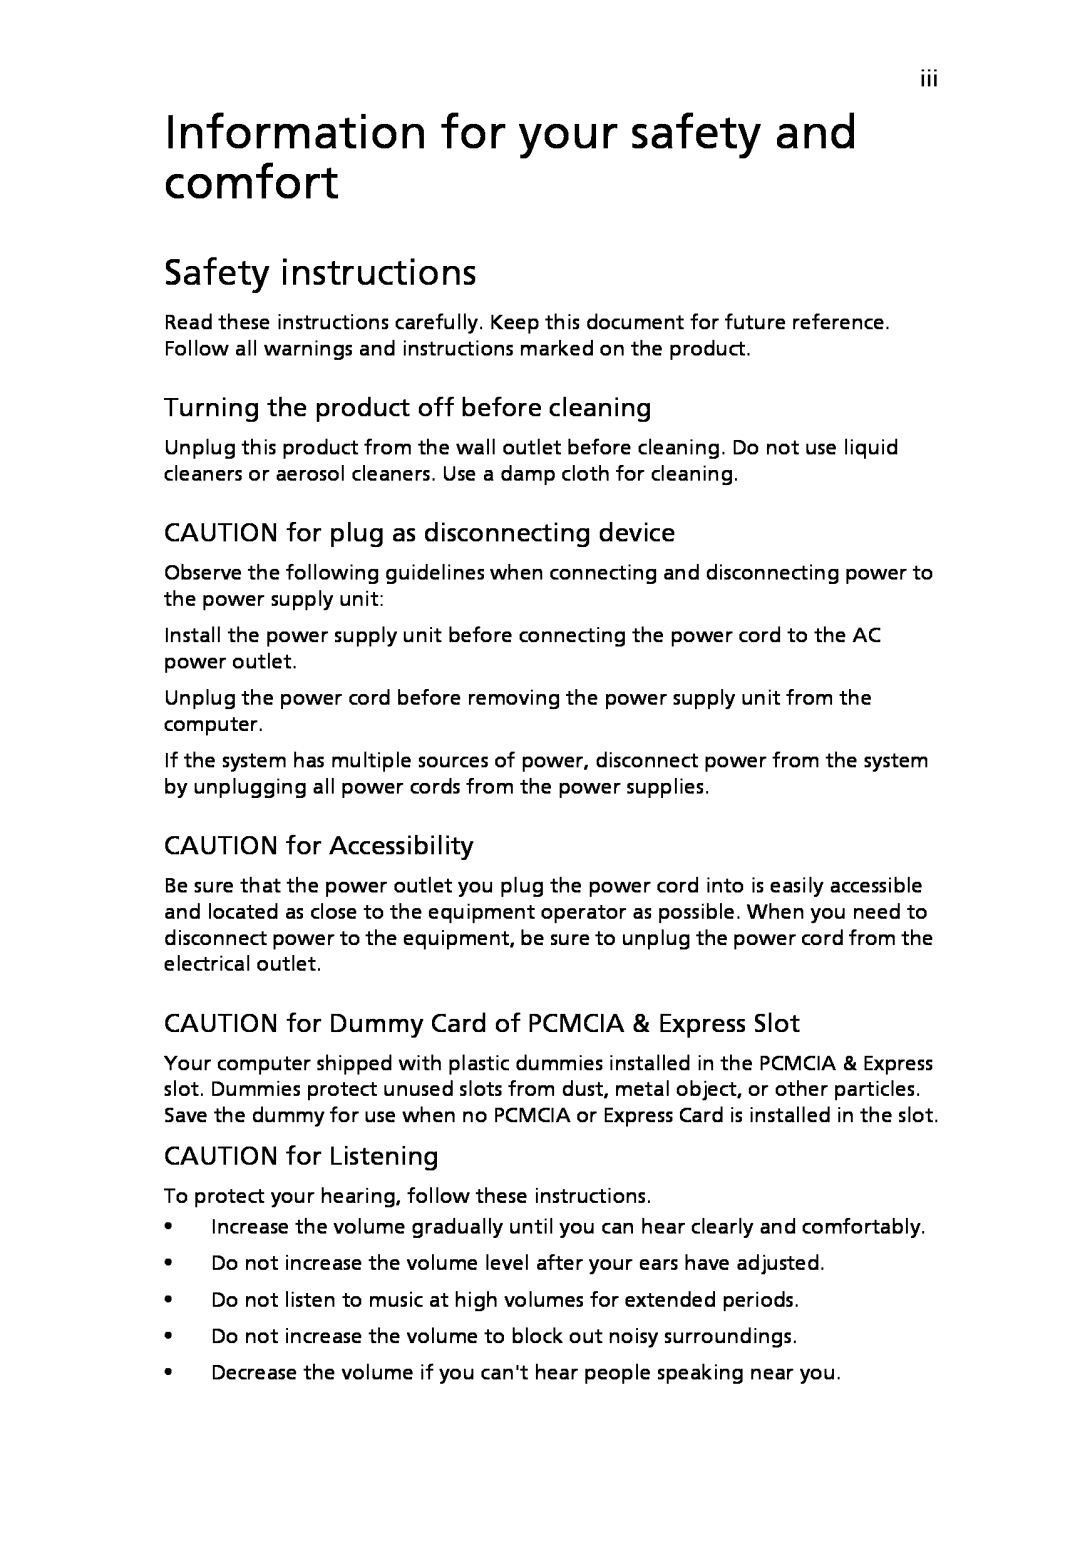 Acer 9120 manual Information for your safety and comfort, Safety instructions, Turning the product off before cleaning 